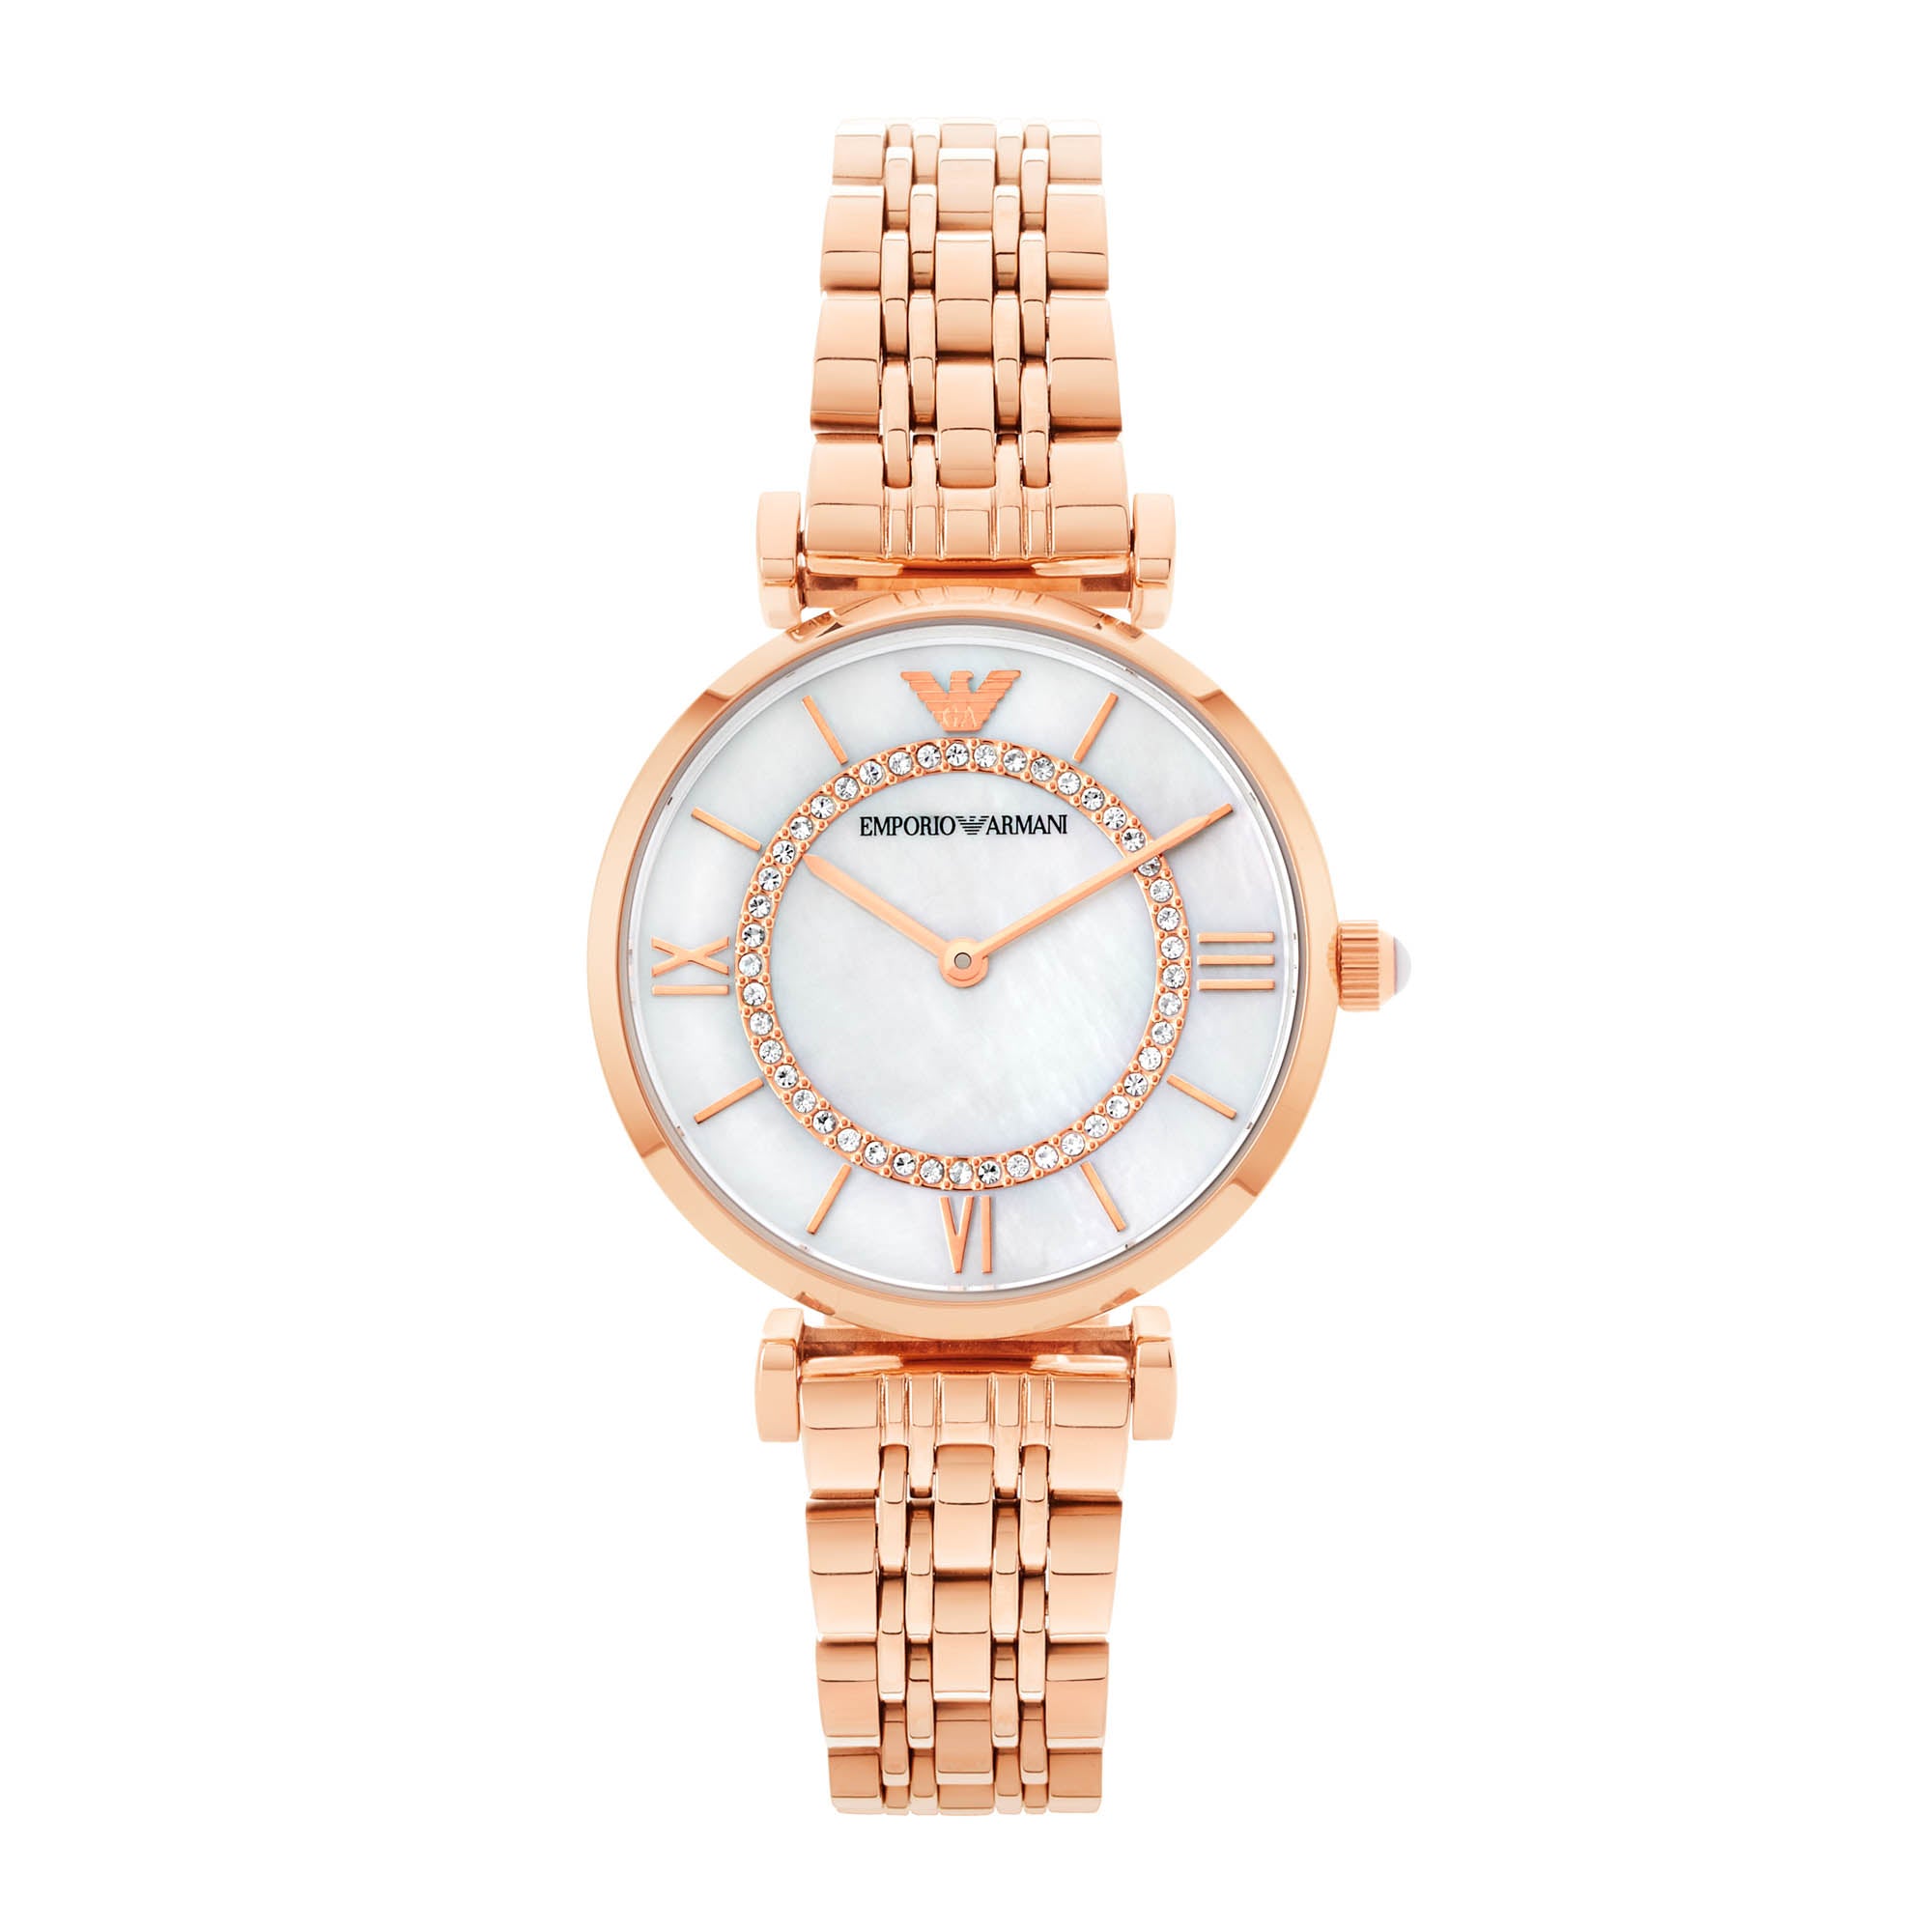 Emporio Armani Gianni T-Bar Watch AR1909 - Rose Gold | MODE STORE